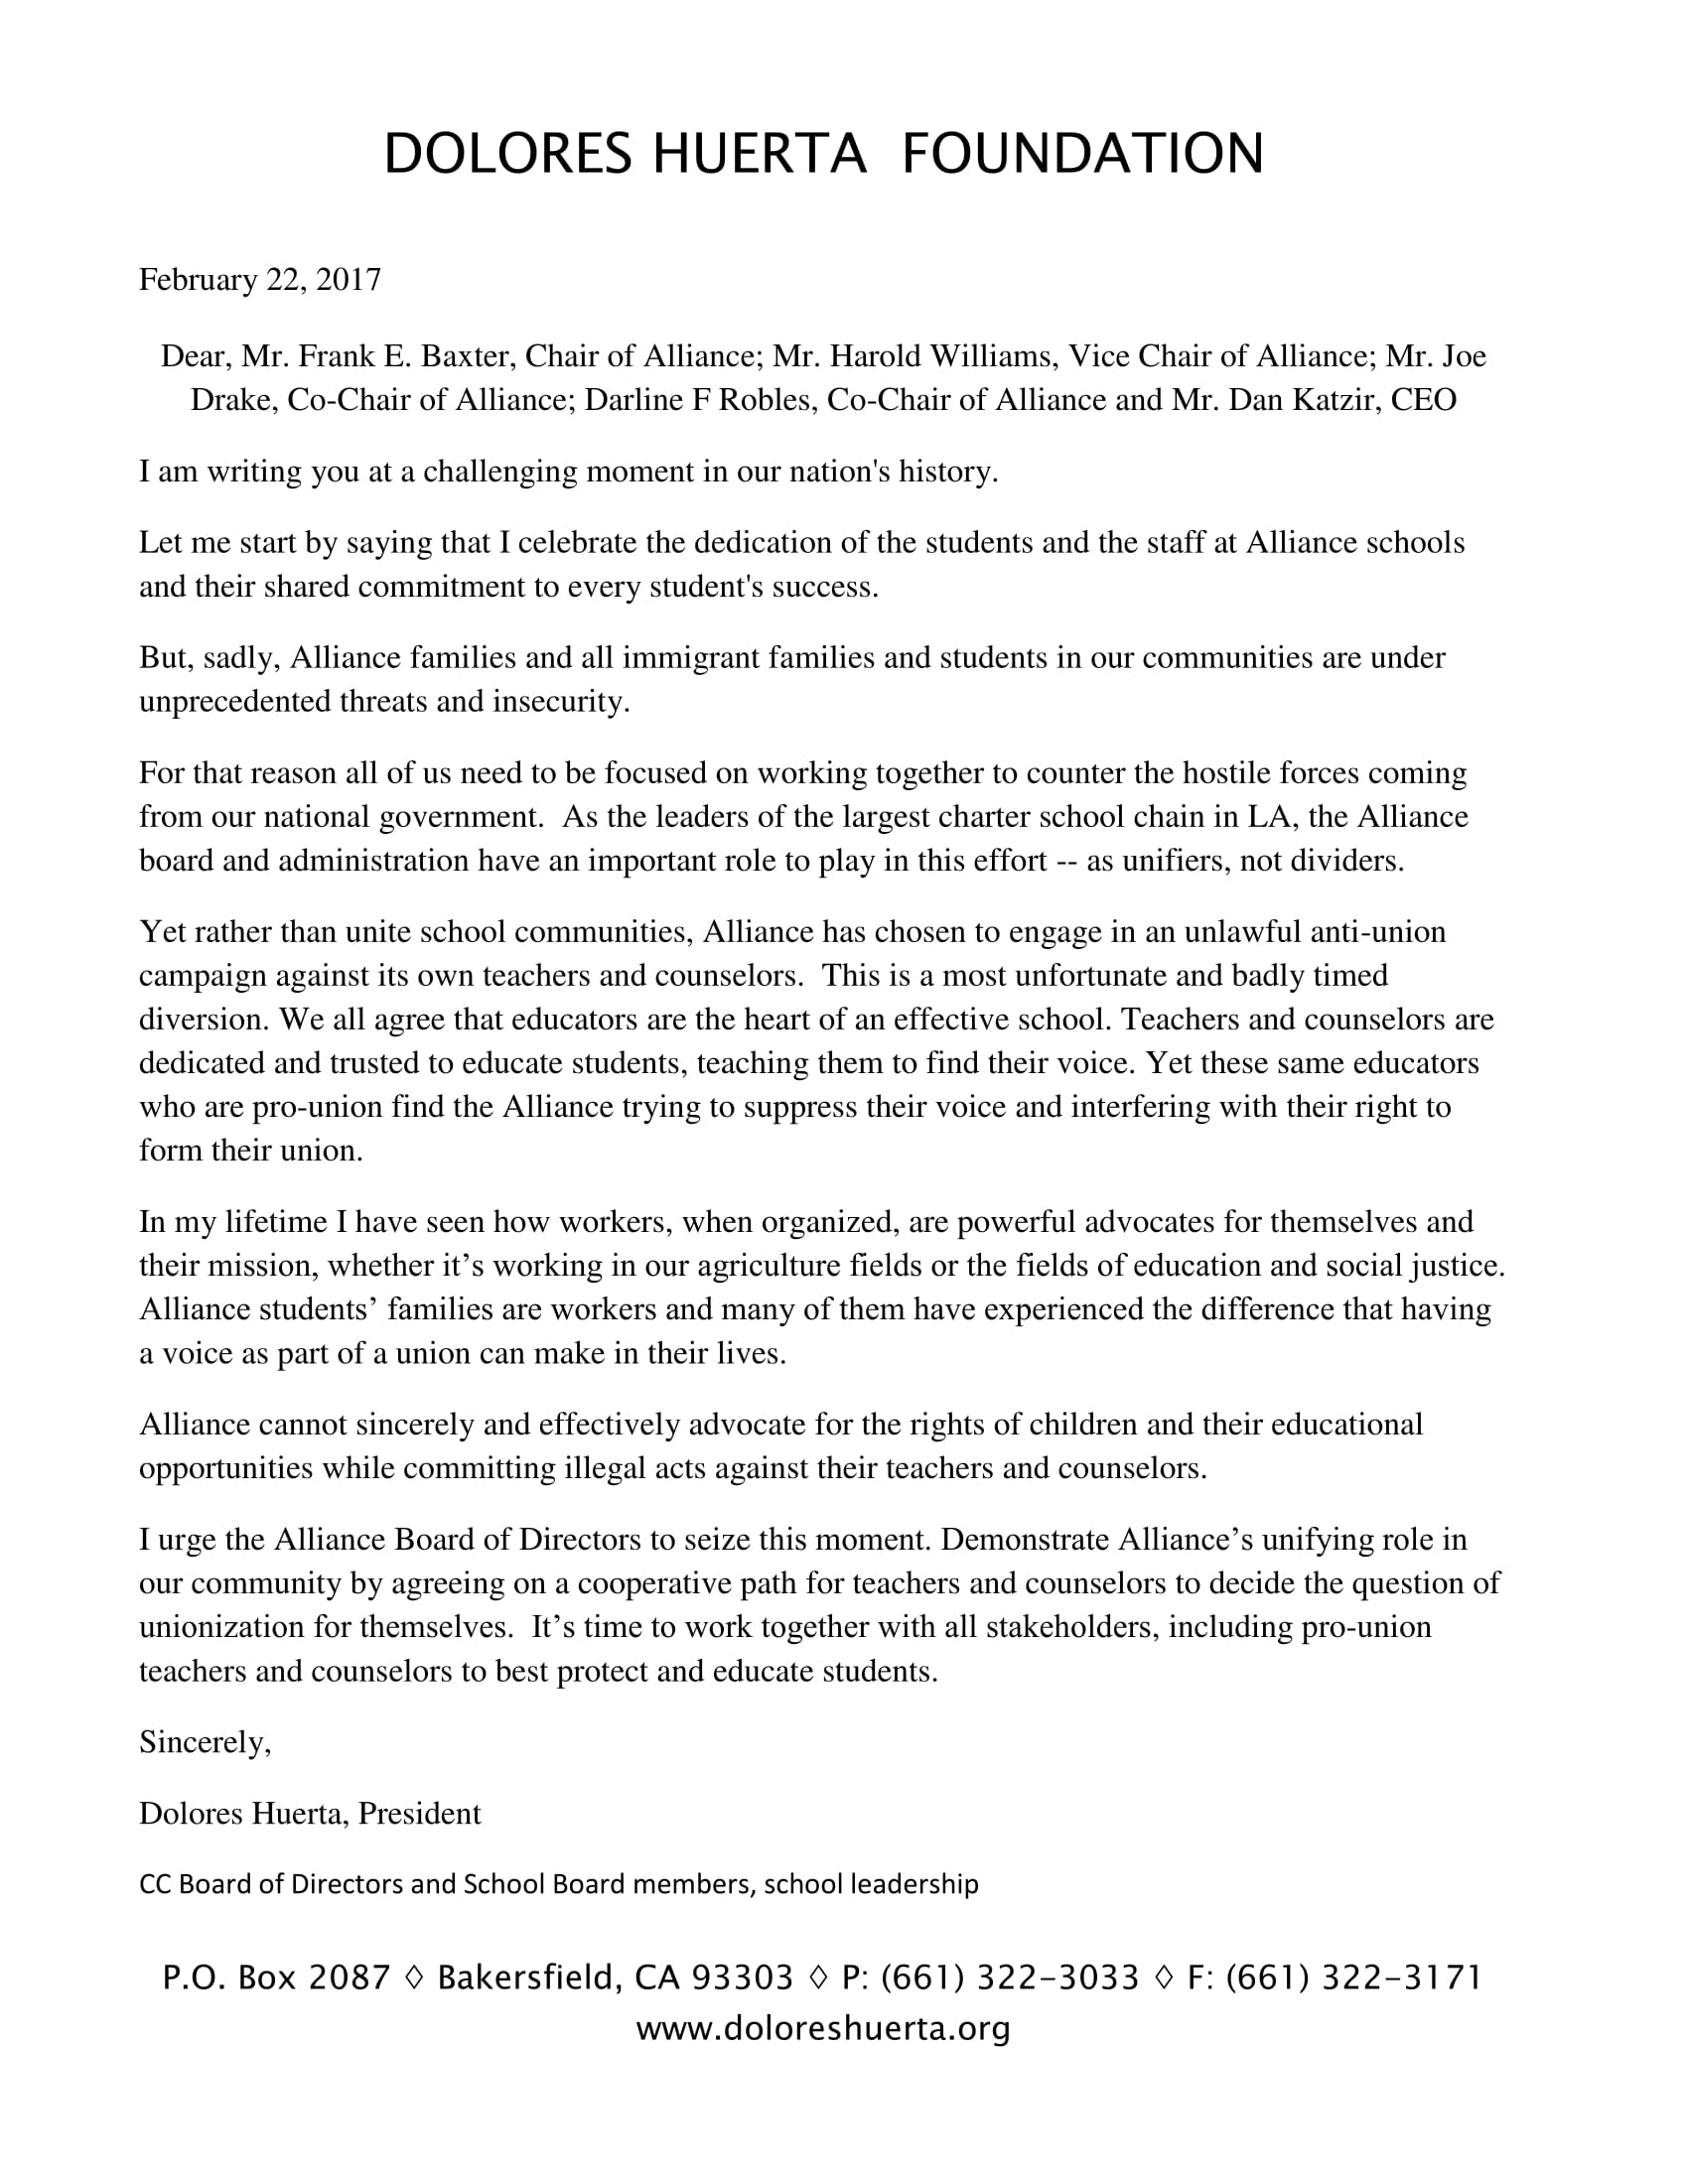 Letter from Dolores Huerta-1